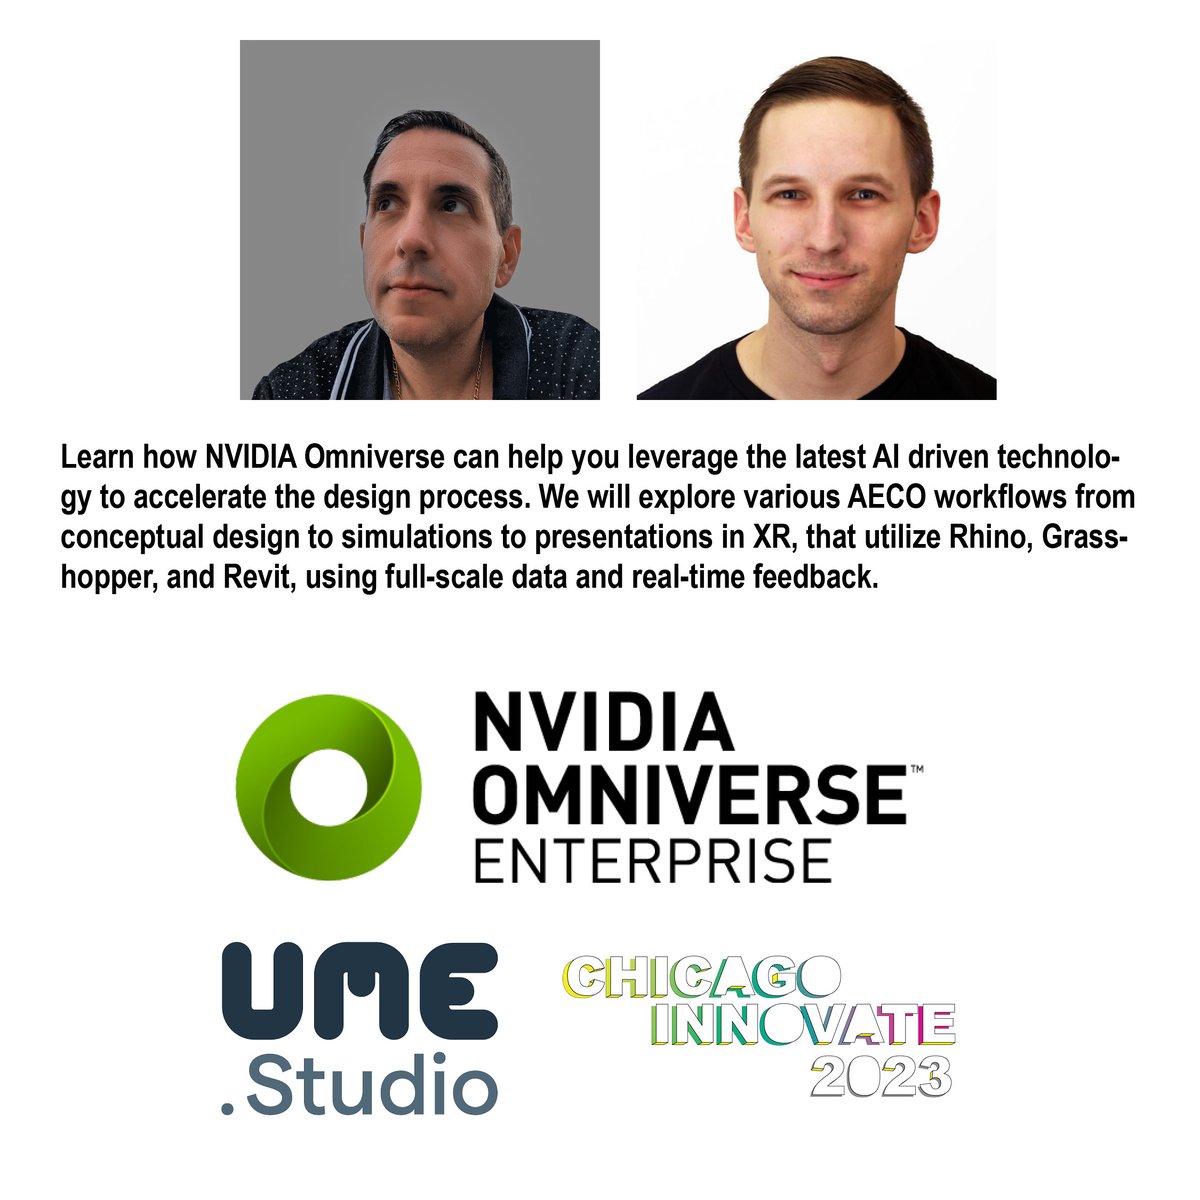 Want to leverage AI with in your design process, we have another cool workshop!!

@nvidiaomniverse  will be conducting a hybrid workshop!

eventbrite.com/e/omniverse-de…

#chicagoinnovate #aec #bim #ai #AEC2023 #design #umestudio #revit #rhino3d